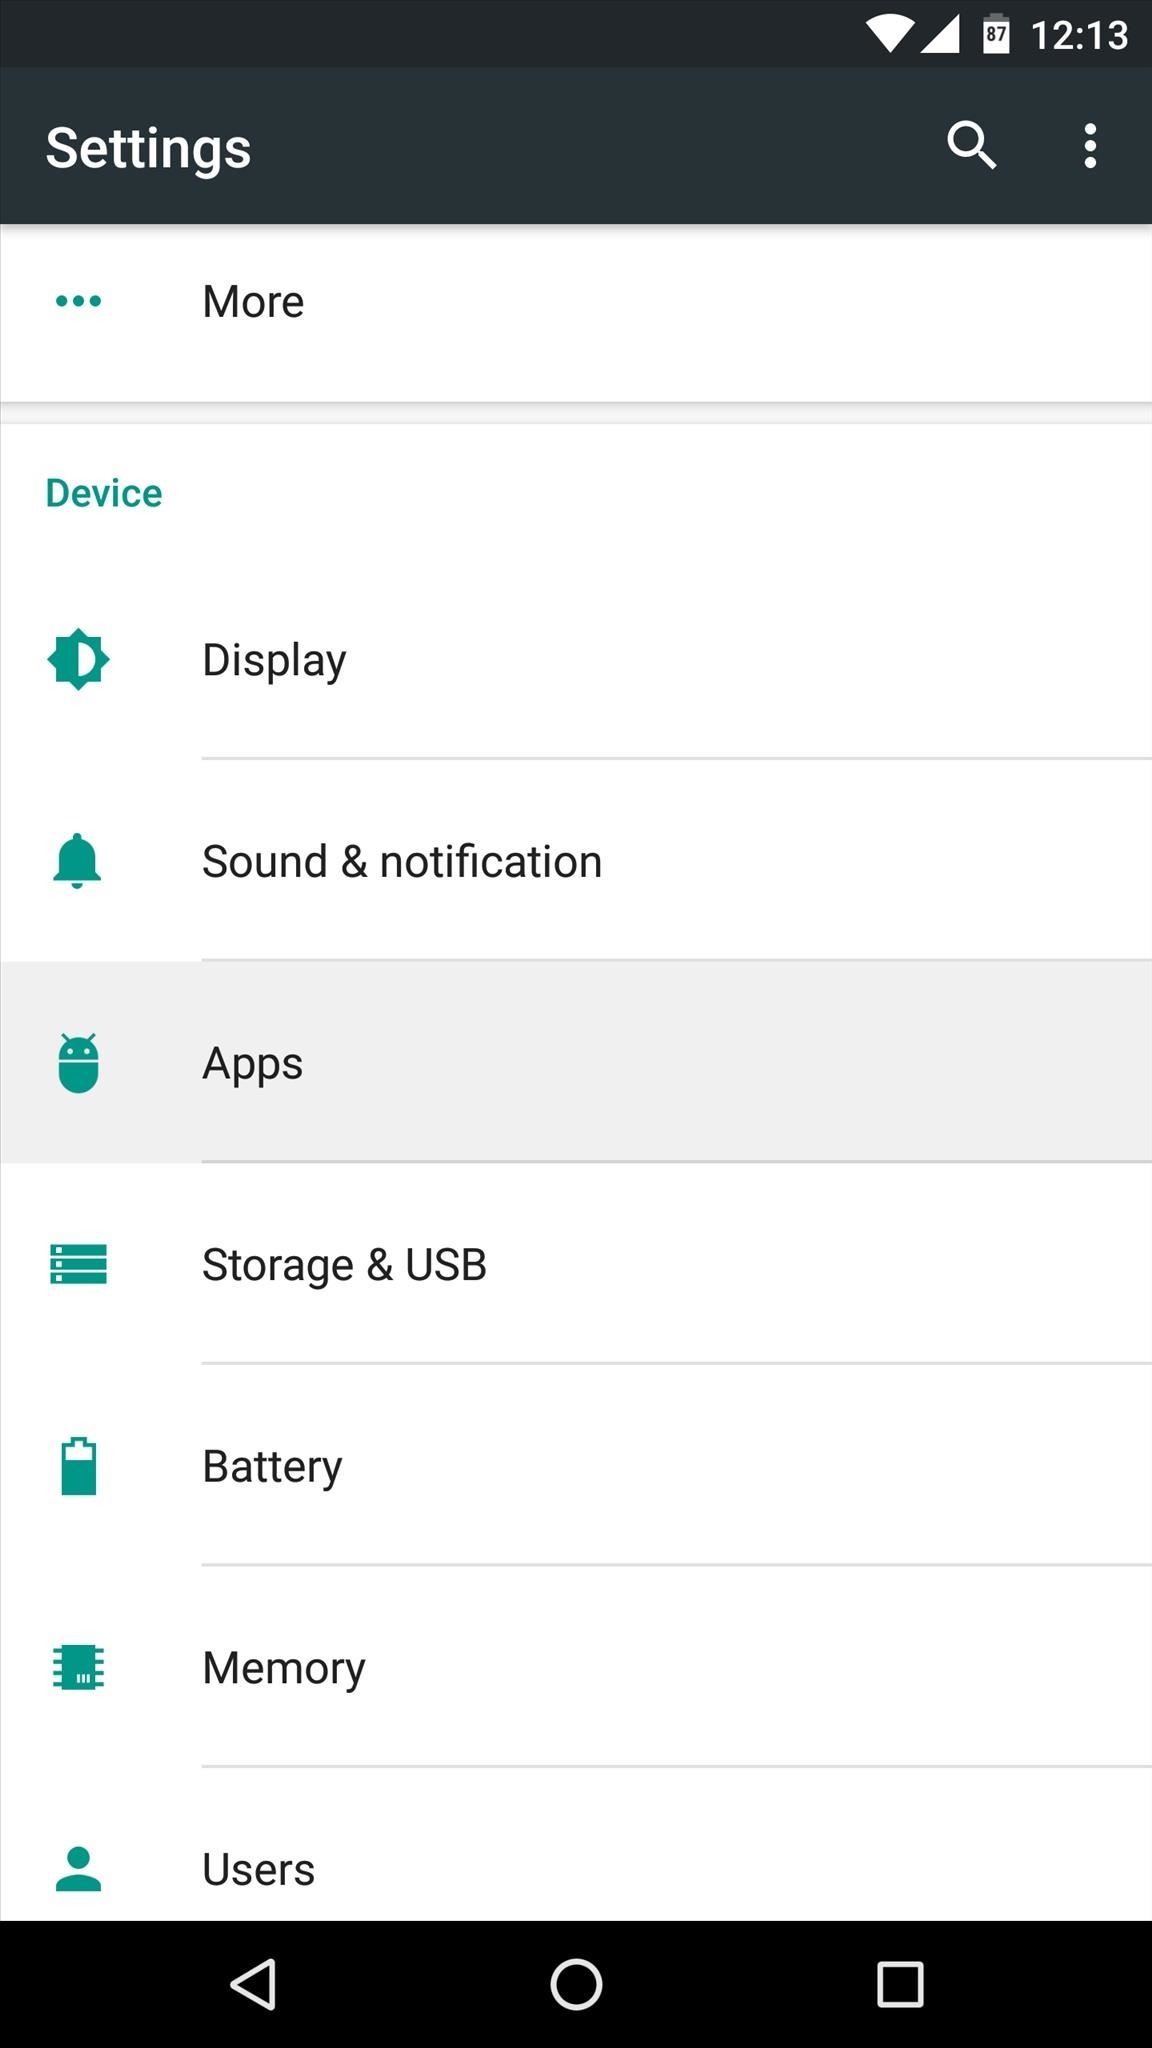 Android Basics: How to Manage App Permissions on Marshmallow or Higher